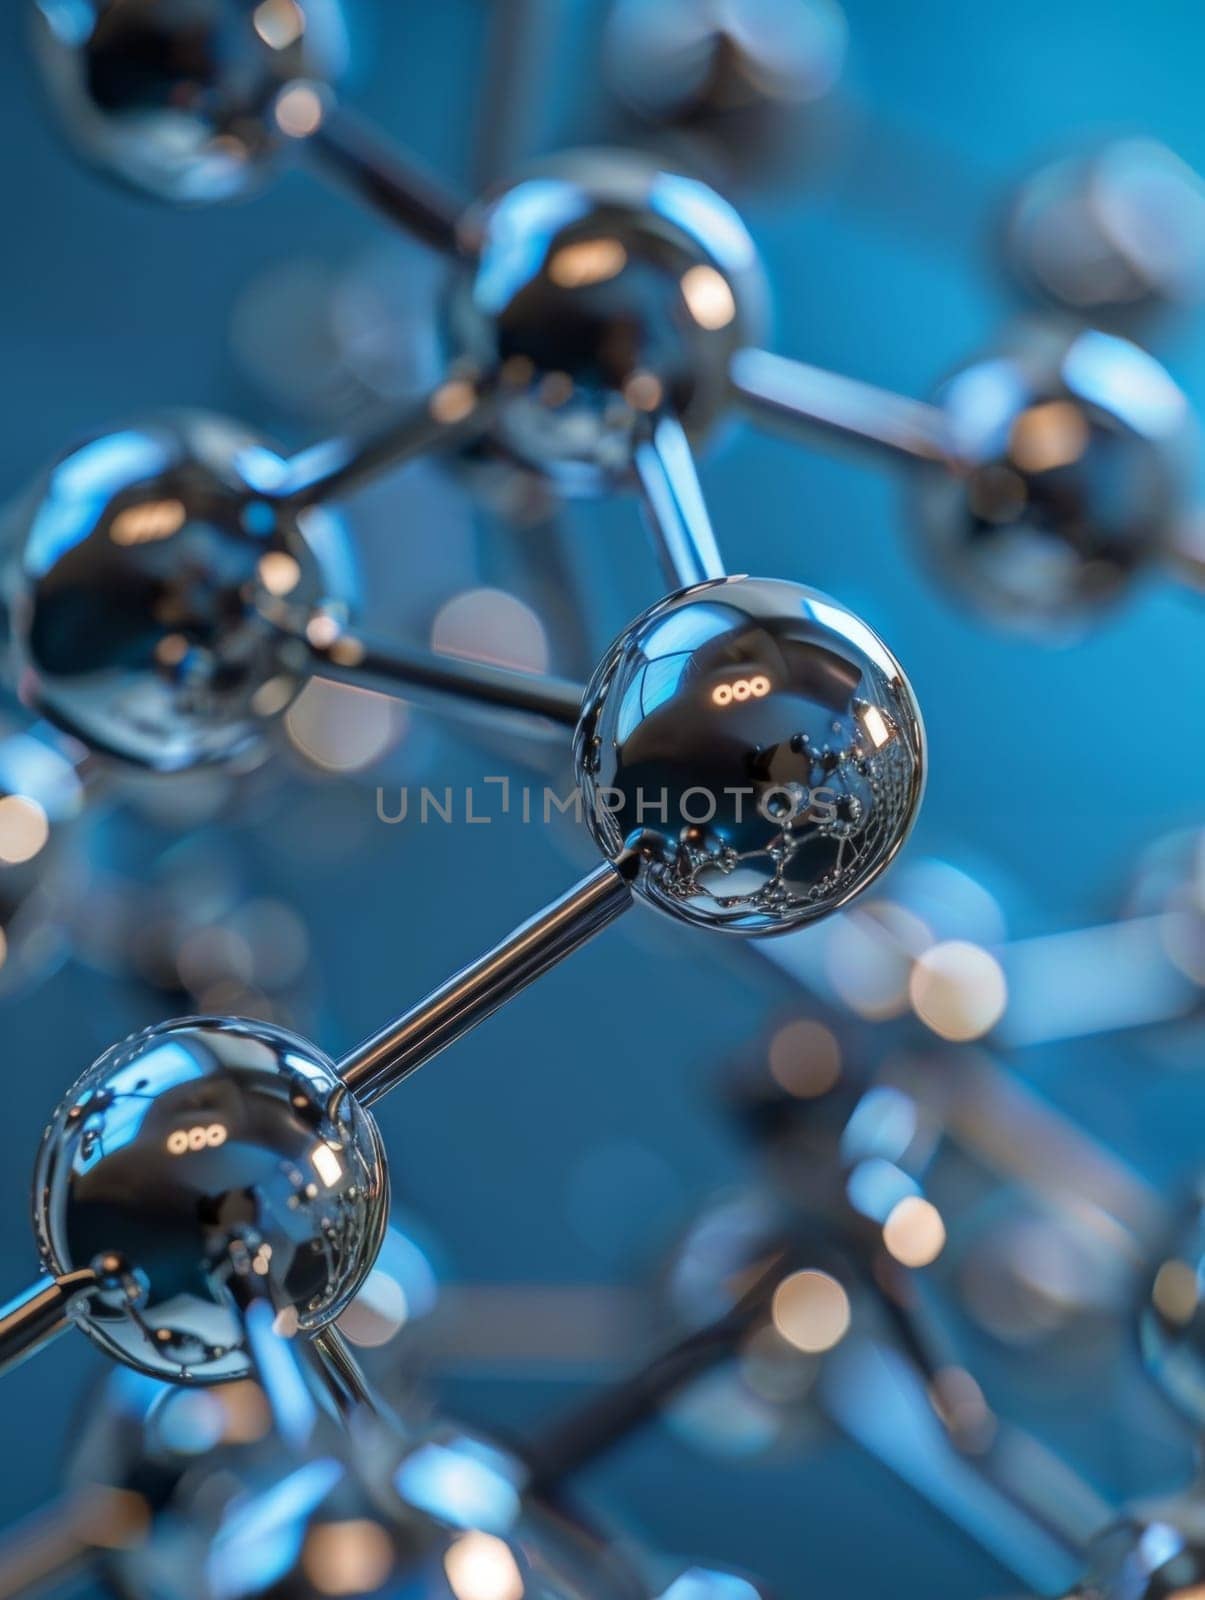 Macro shot of a sophisticated molecular mesh with reflective nodes and connections, set against a gradient blue backdrop